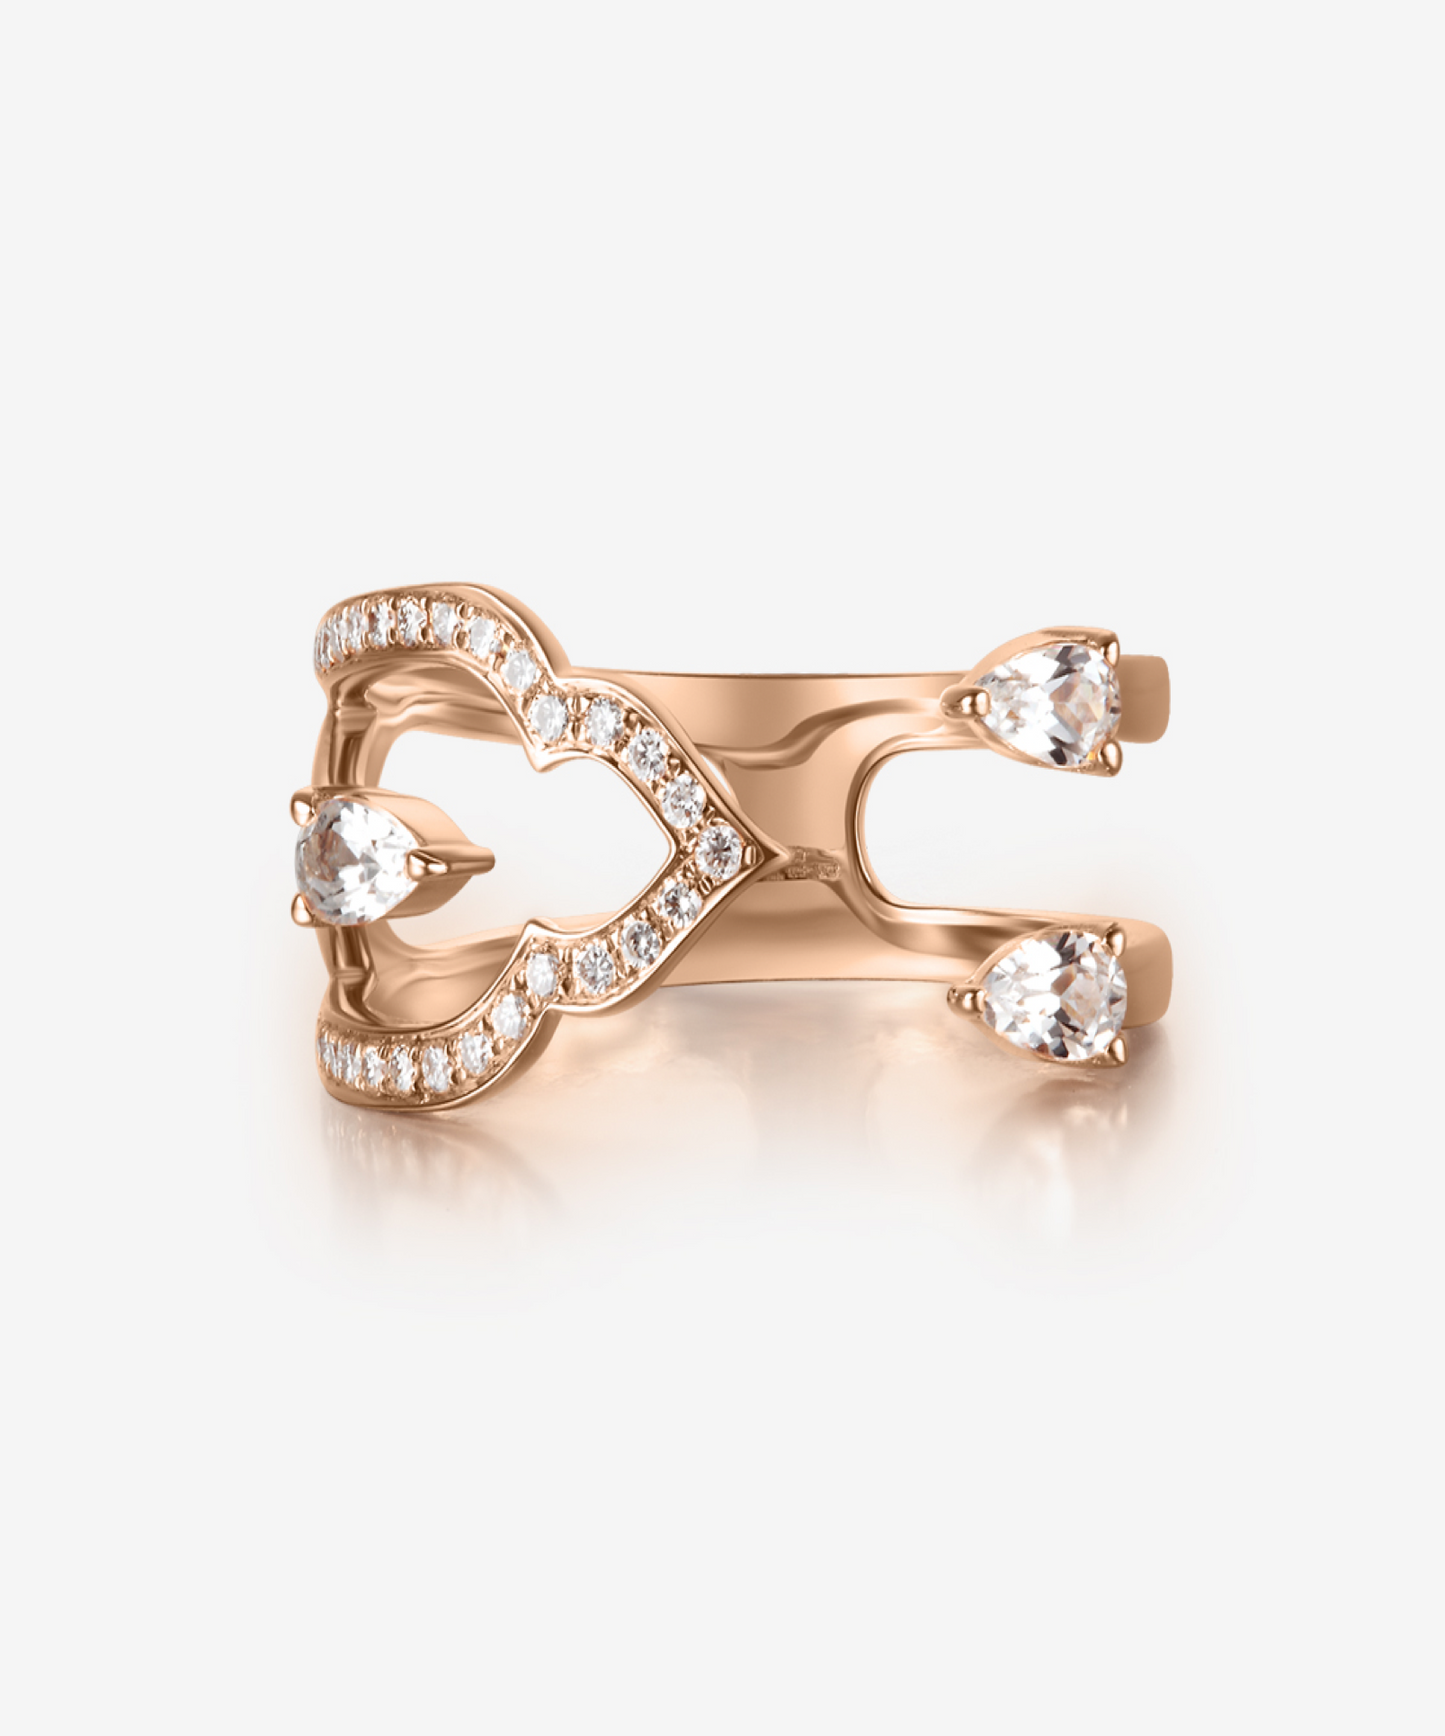 ROMAnce • ROYAL GATEWAY - White Sapphire and Rose Gold Ring